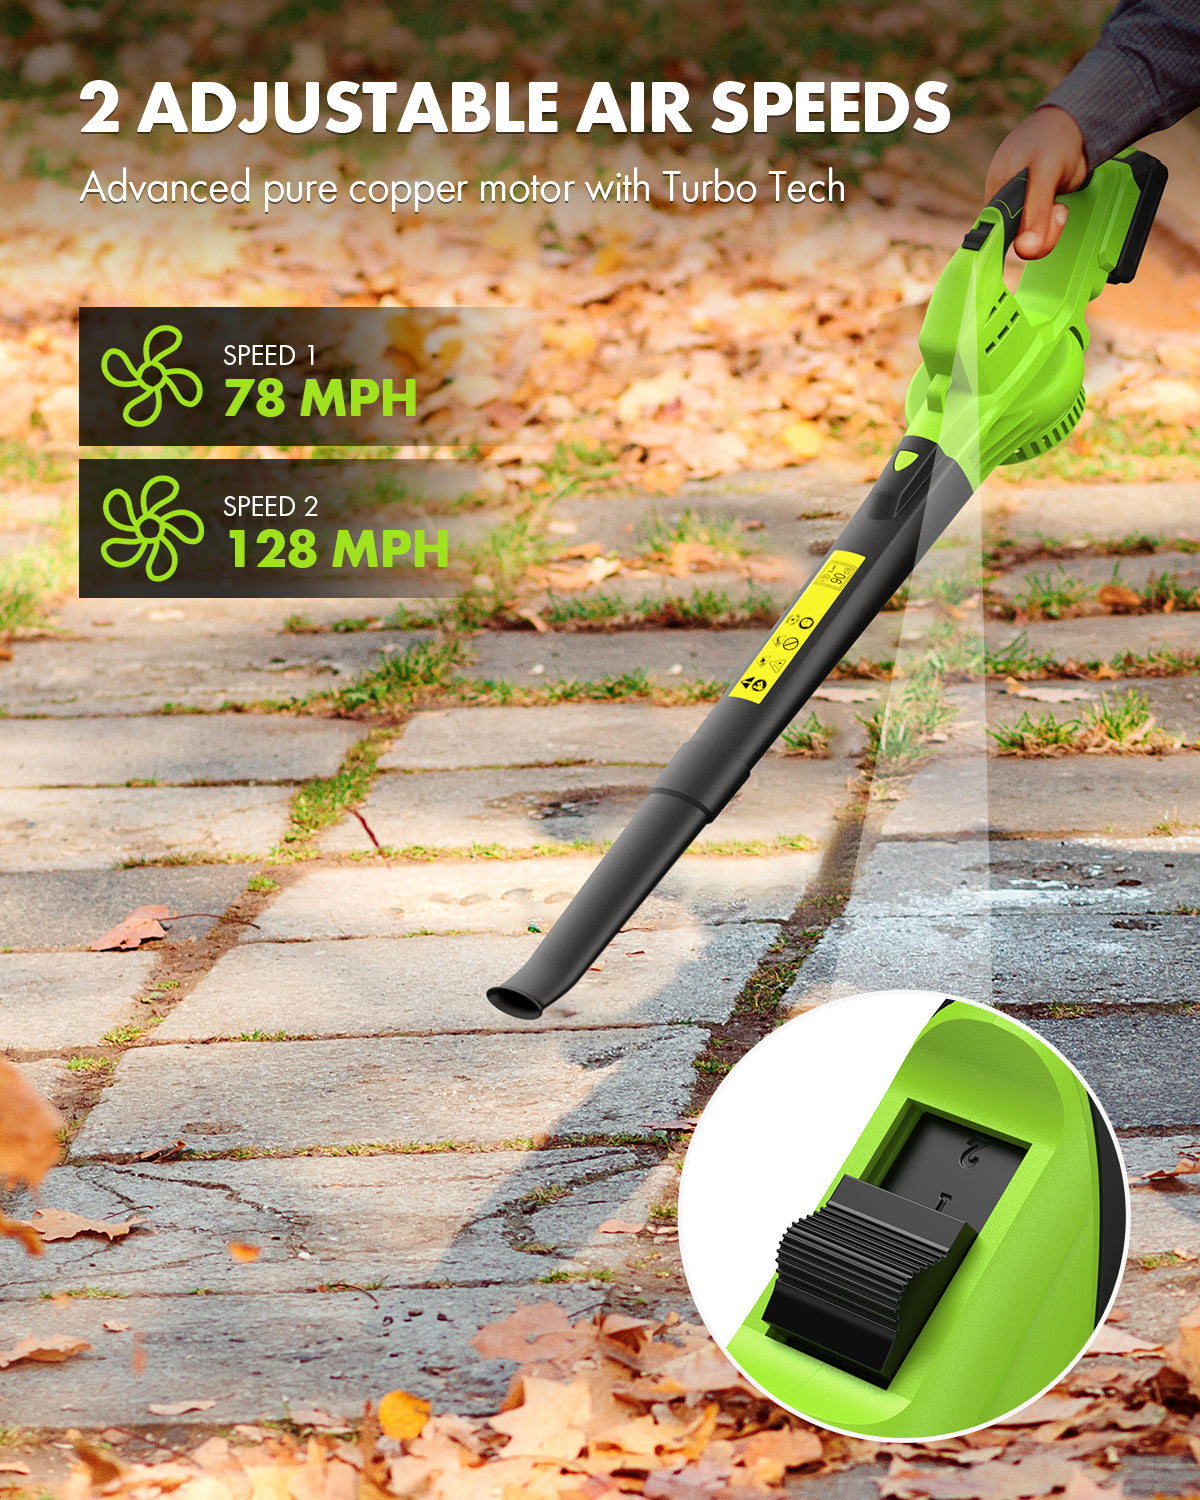 Leaf Blower Cordless with Battery and Charger - Anykit Electric Leaf Blower Battery Operated, Blower Cordless 20V 2 Speed Modes Handheld for Clearing Patio Driveway